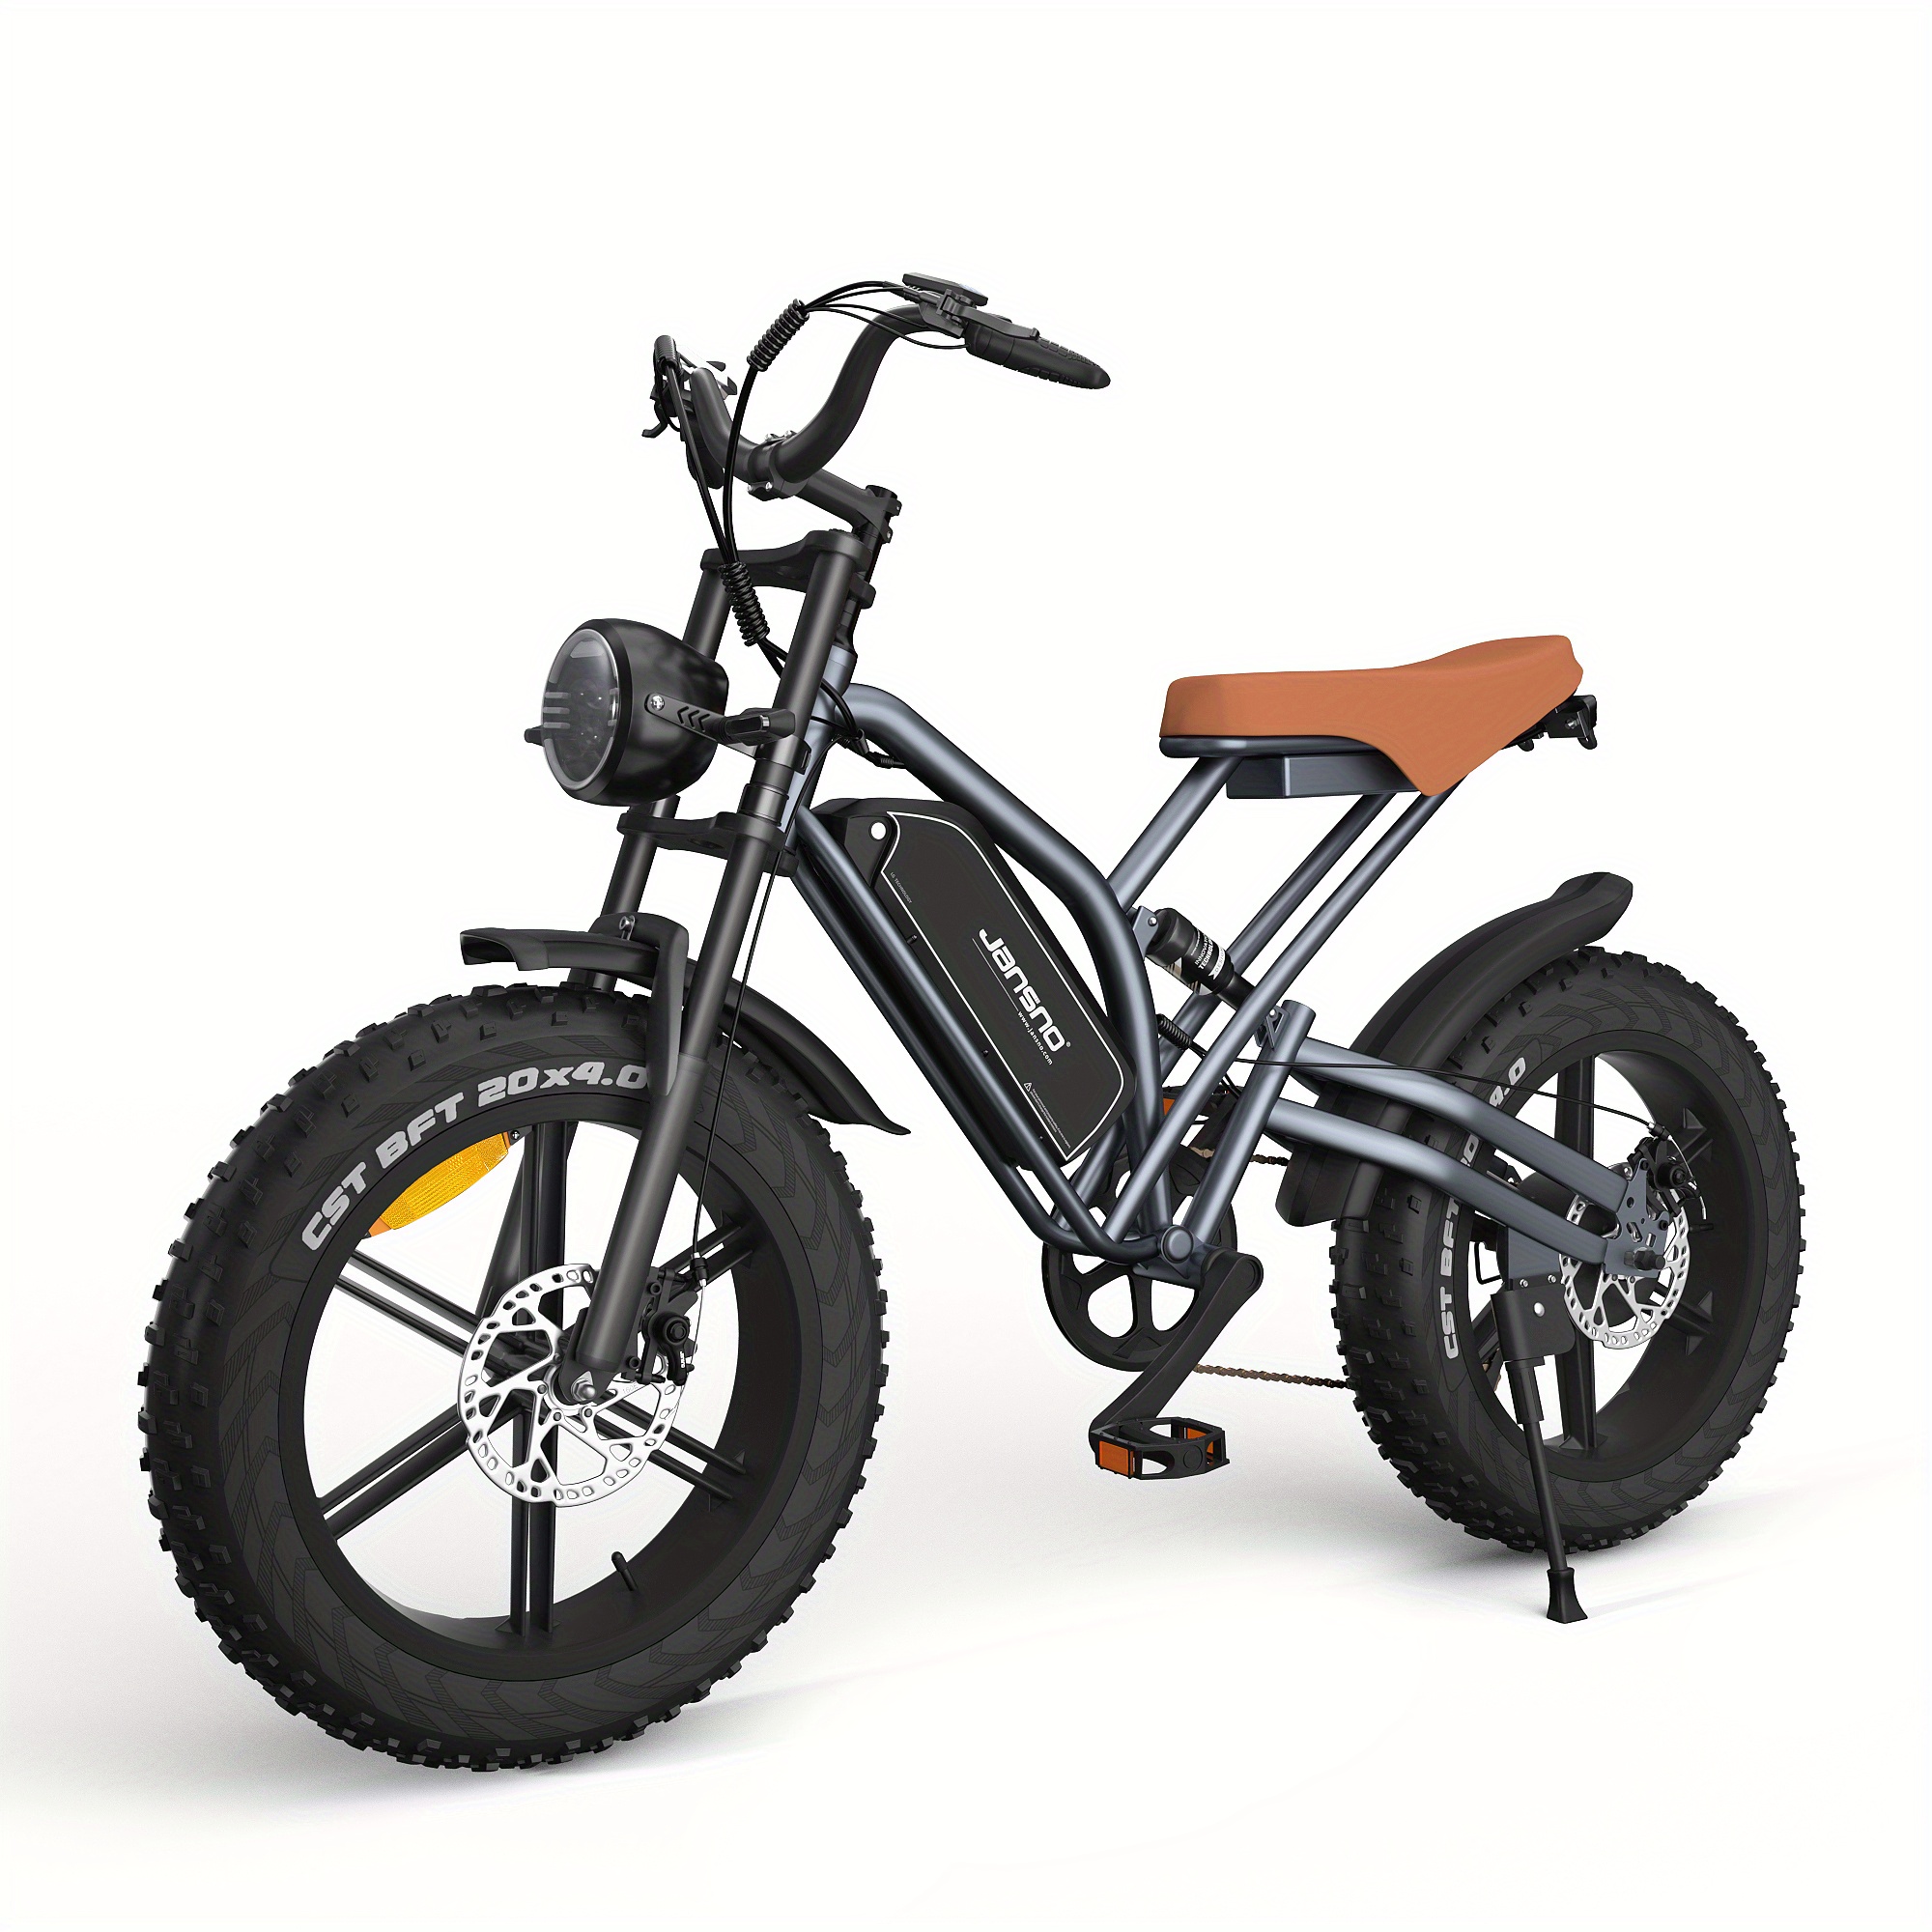 

Electric Bike 20" X 4.0 Electric Bike For Adults With 750w Brushless Motor, Long-lasting 48v 14ah Removable Battery, 7-speed Transmission, 20 Inch Fat Tires, Integrated Wheels